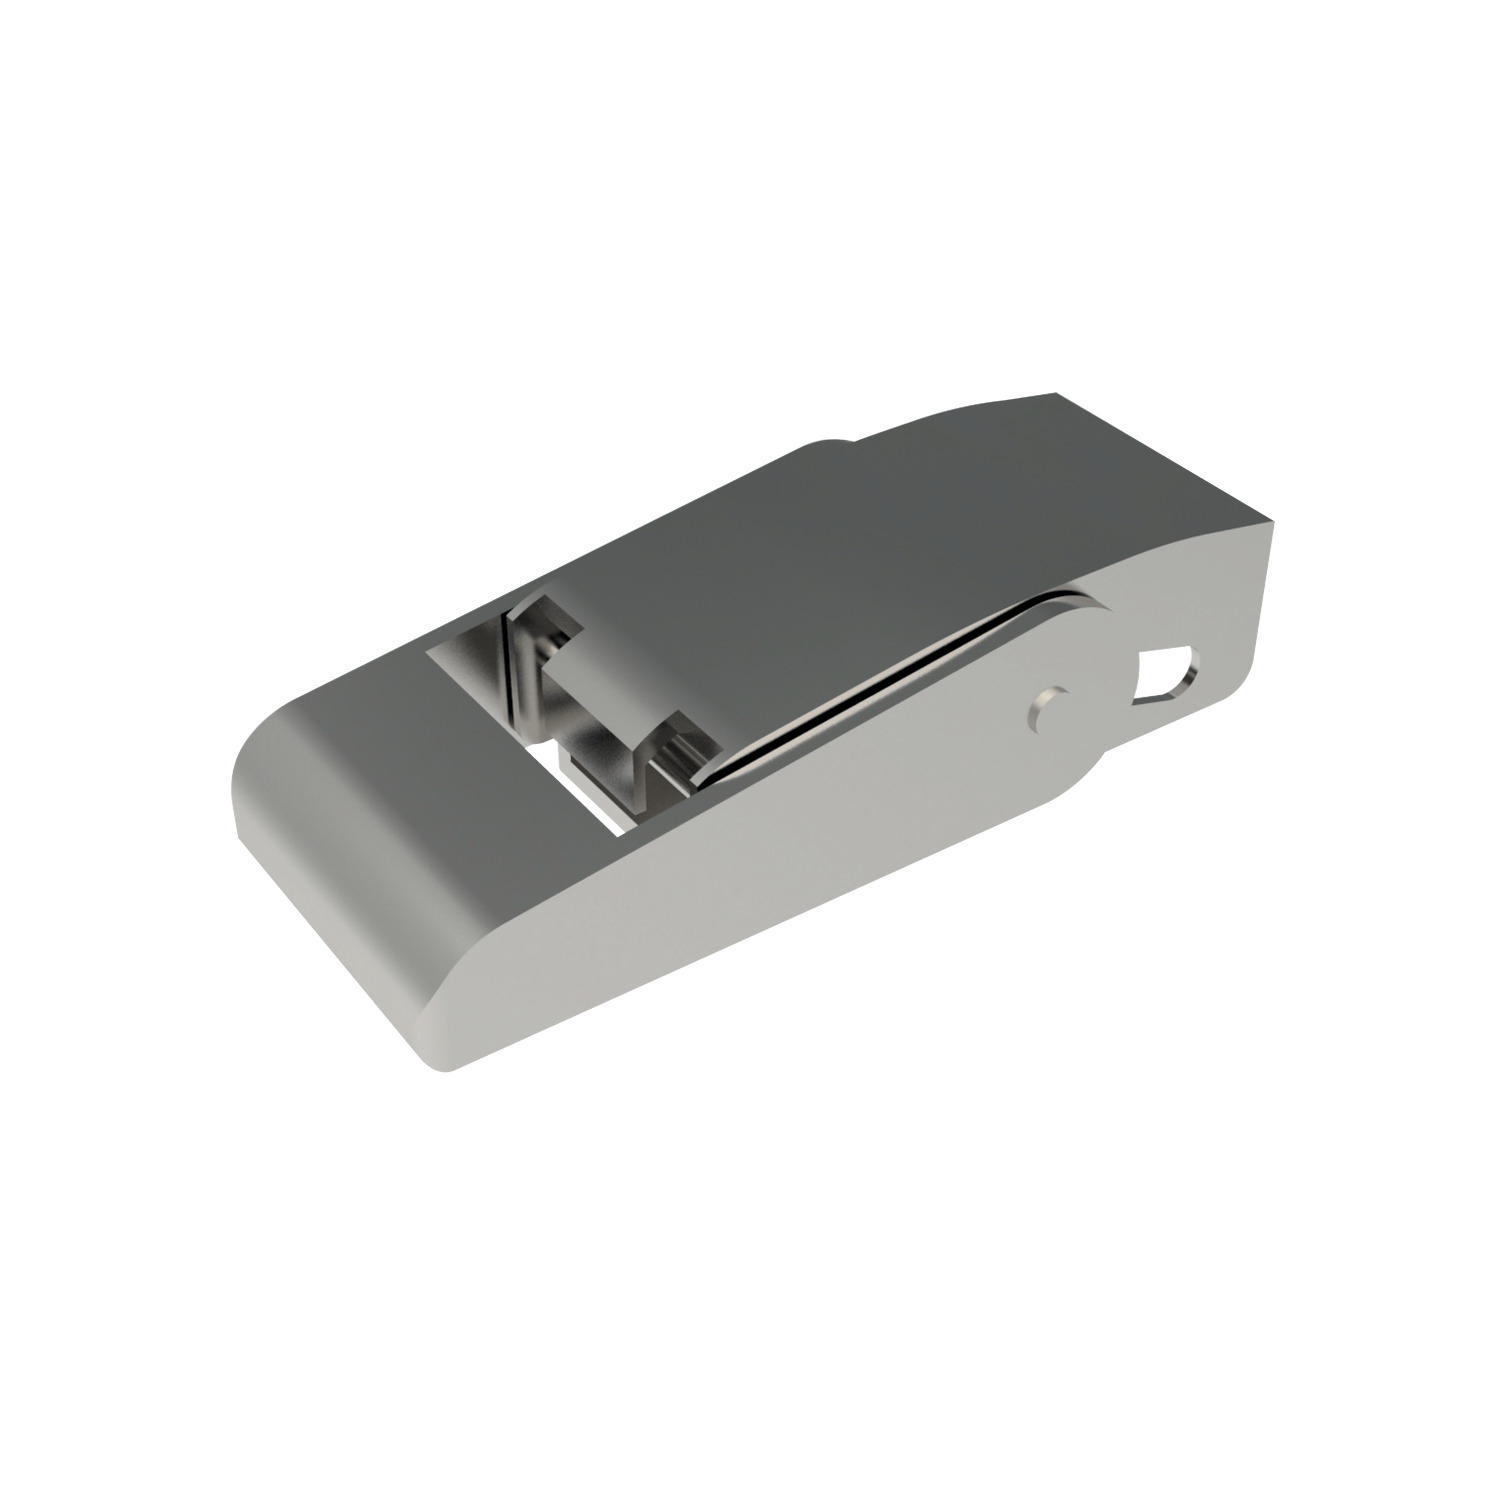 J0300 - Draw Latches - Spring Loaded